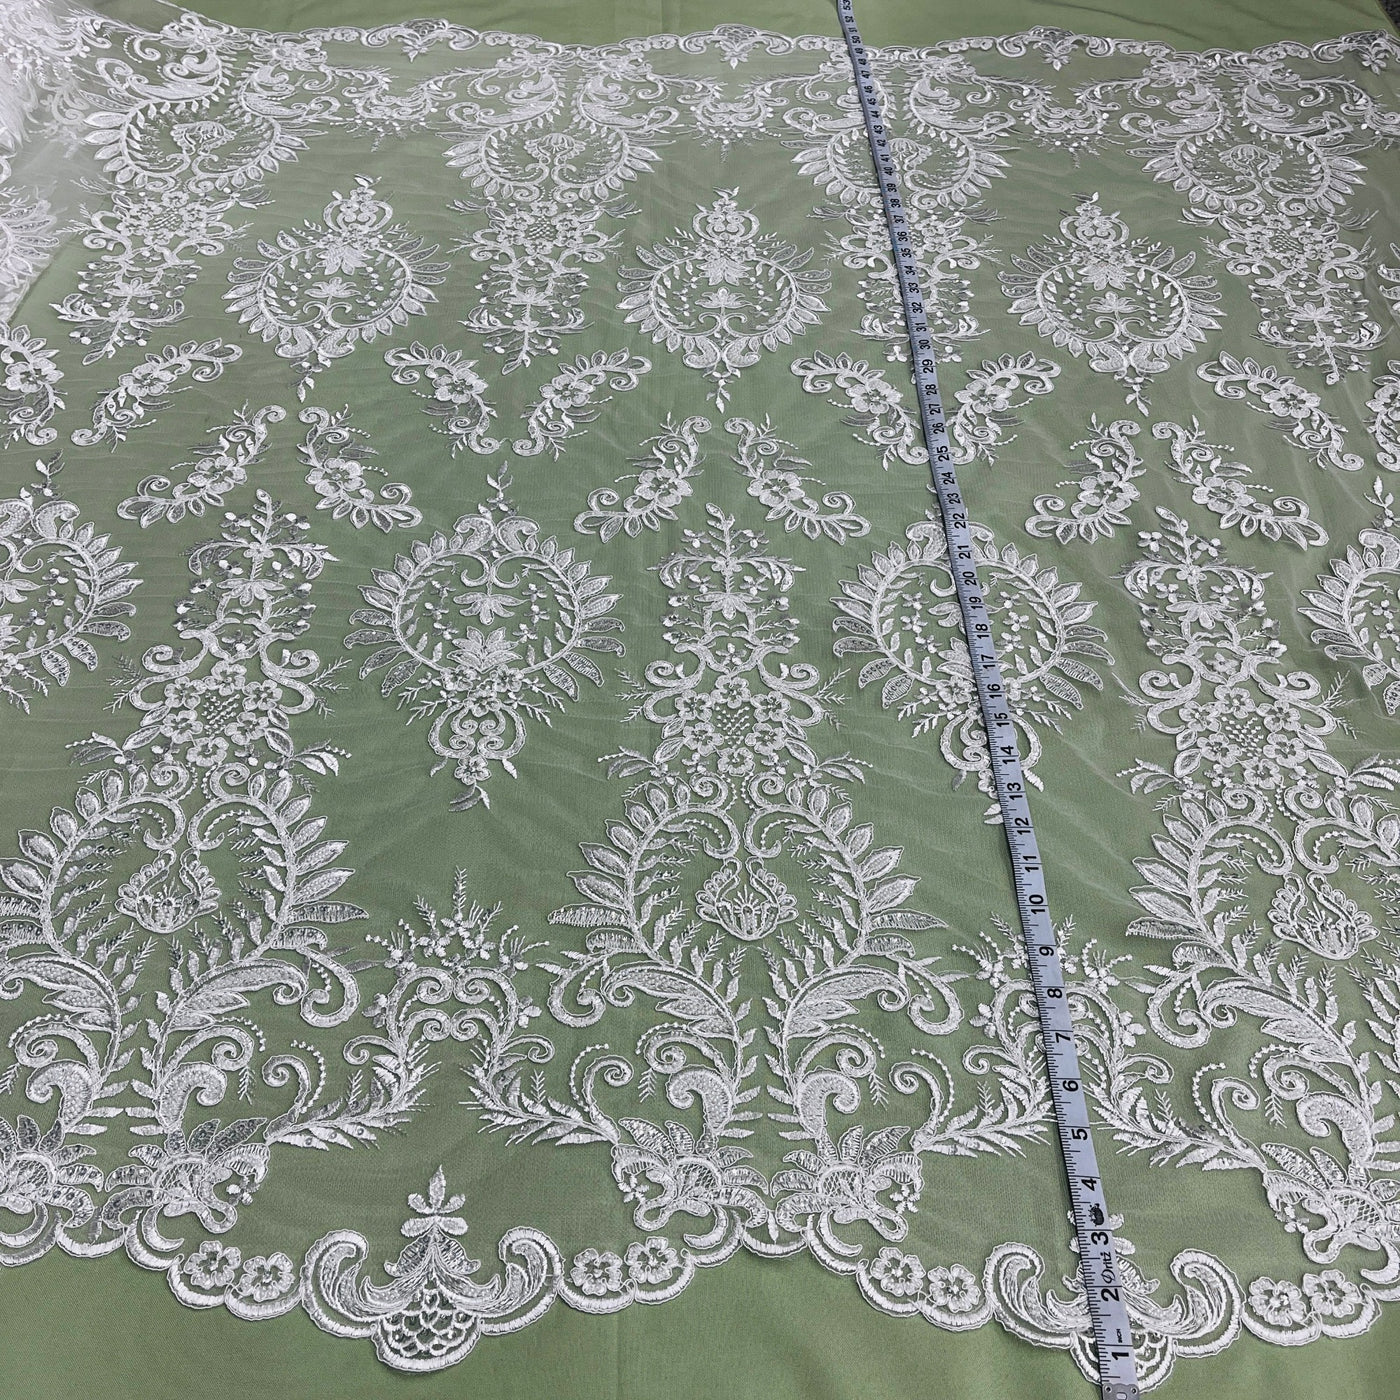 Beaded & Corded Bridal Lace Fabric Embroidered on 100% Polyester Net Mesh | Lace USA - 97160W-HB Ivory